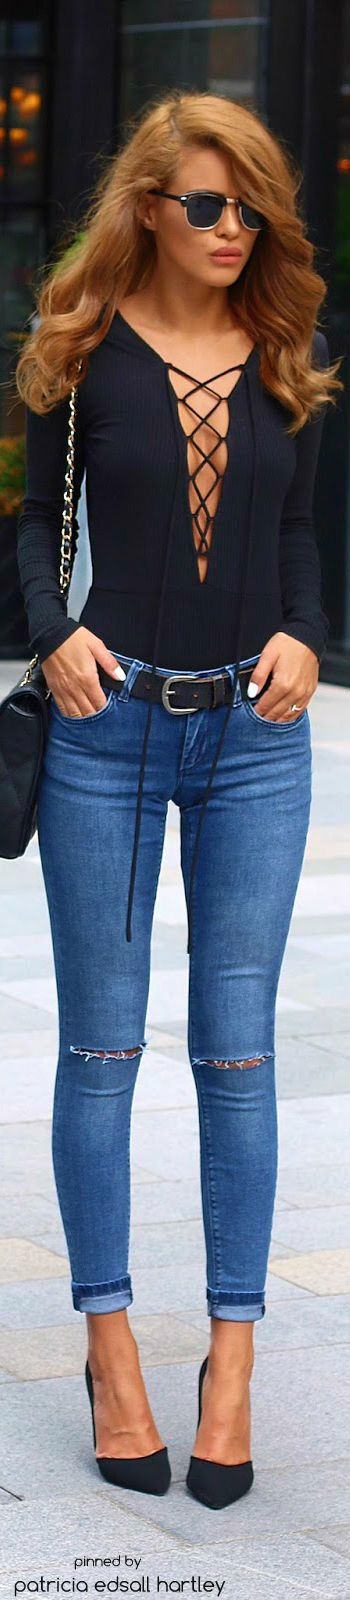 Lace up bodysuit with jeans: College Outfit Ideas  